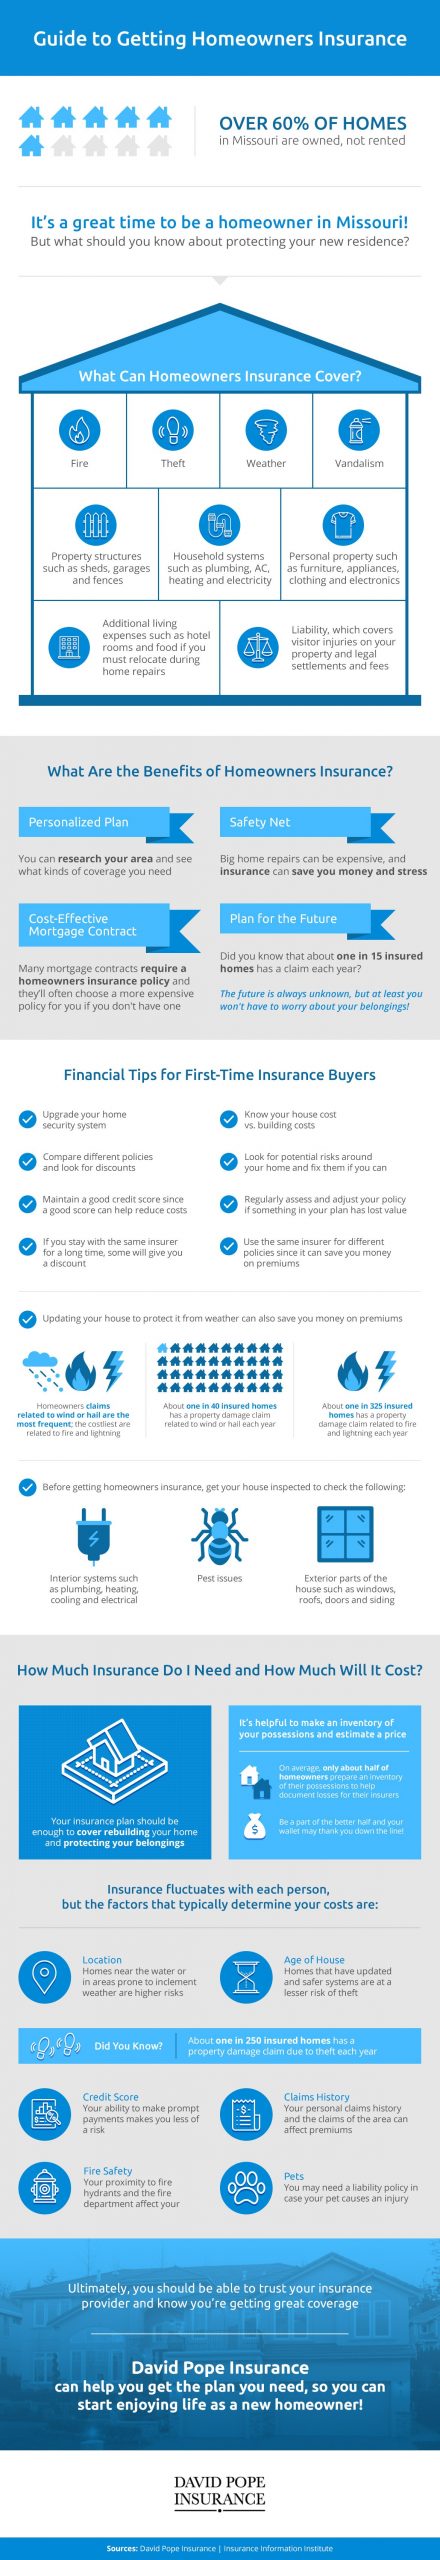 getting home insurance infographic